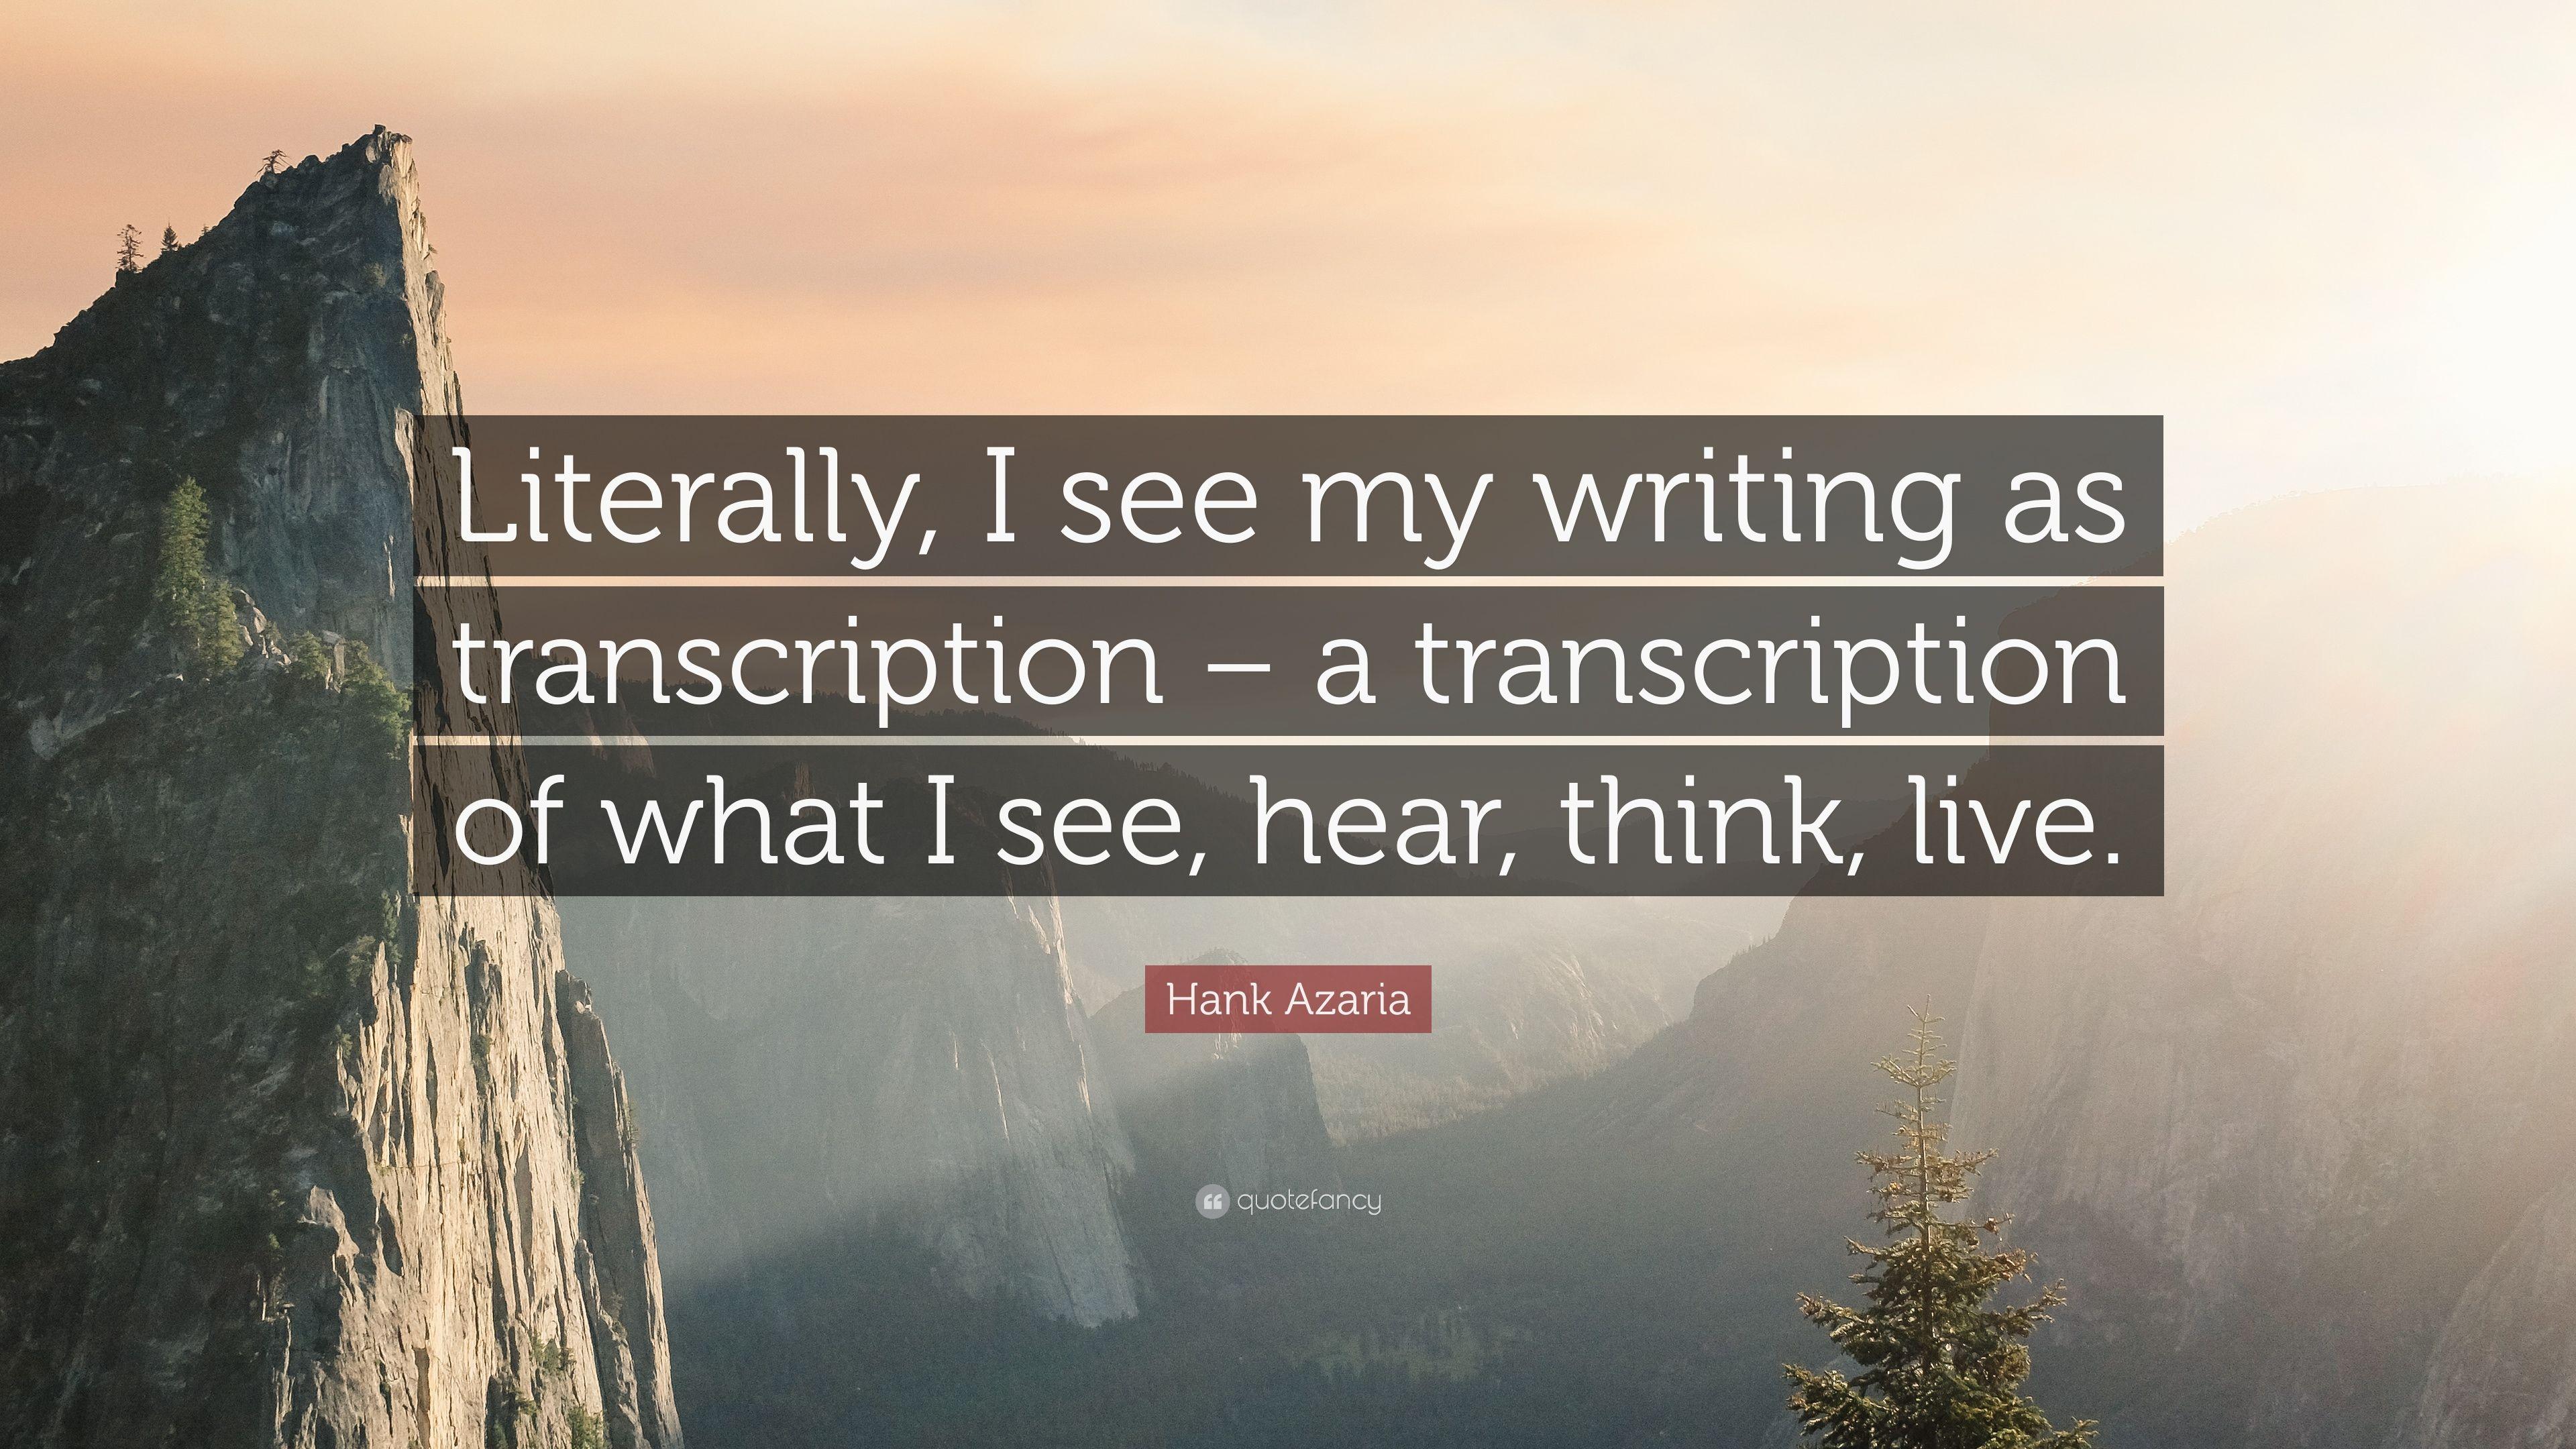 Hank Azaria Quote: “Literally, I see my writing as transcription